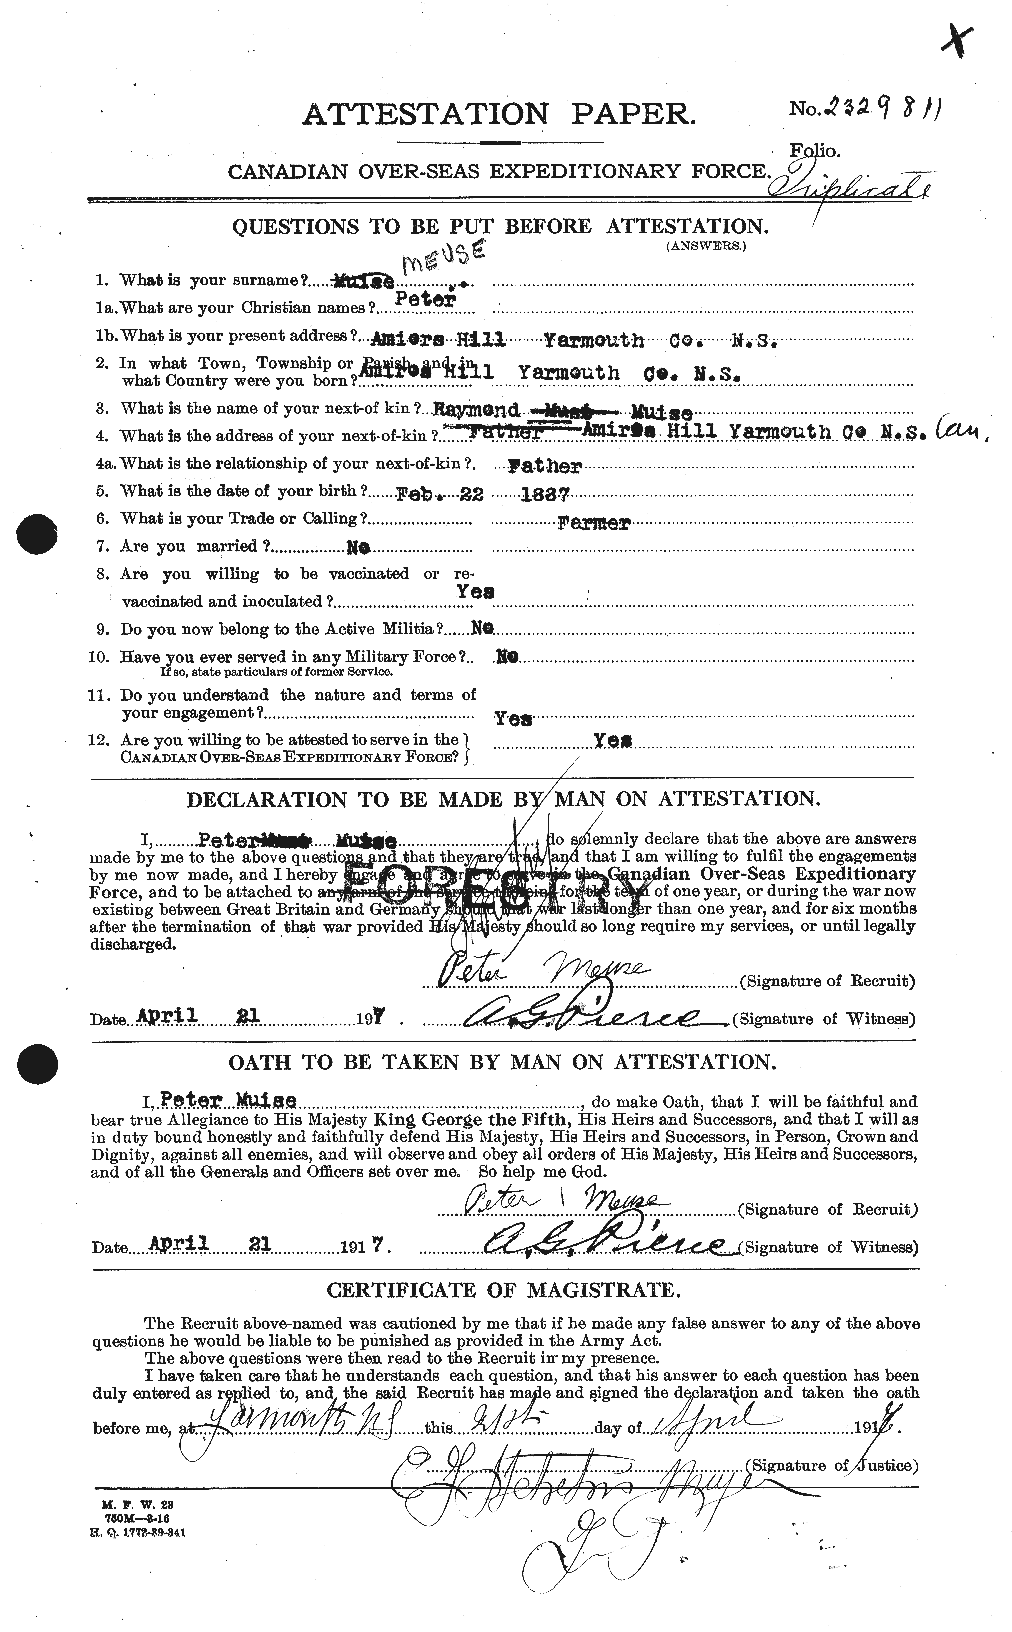 Personnel Records of the First World War - CEF 494742a